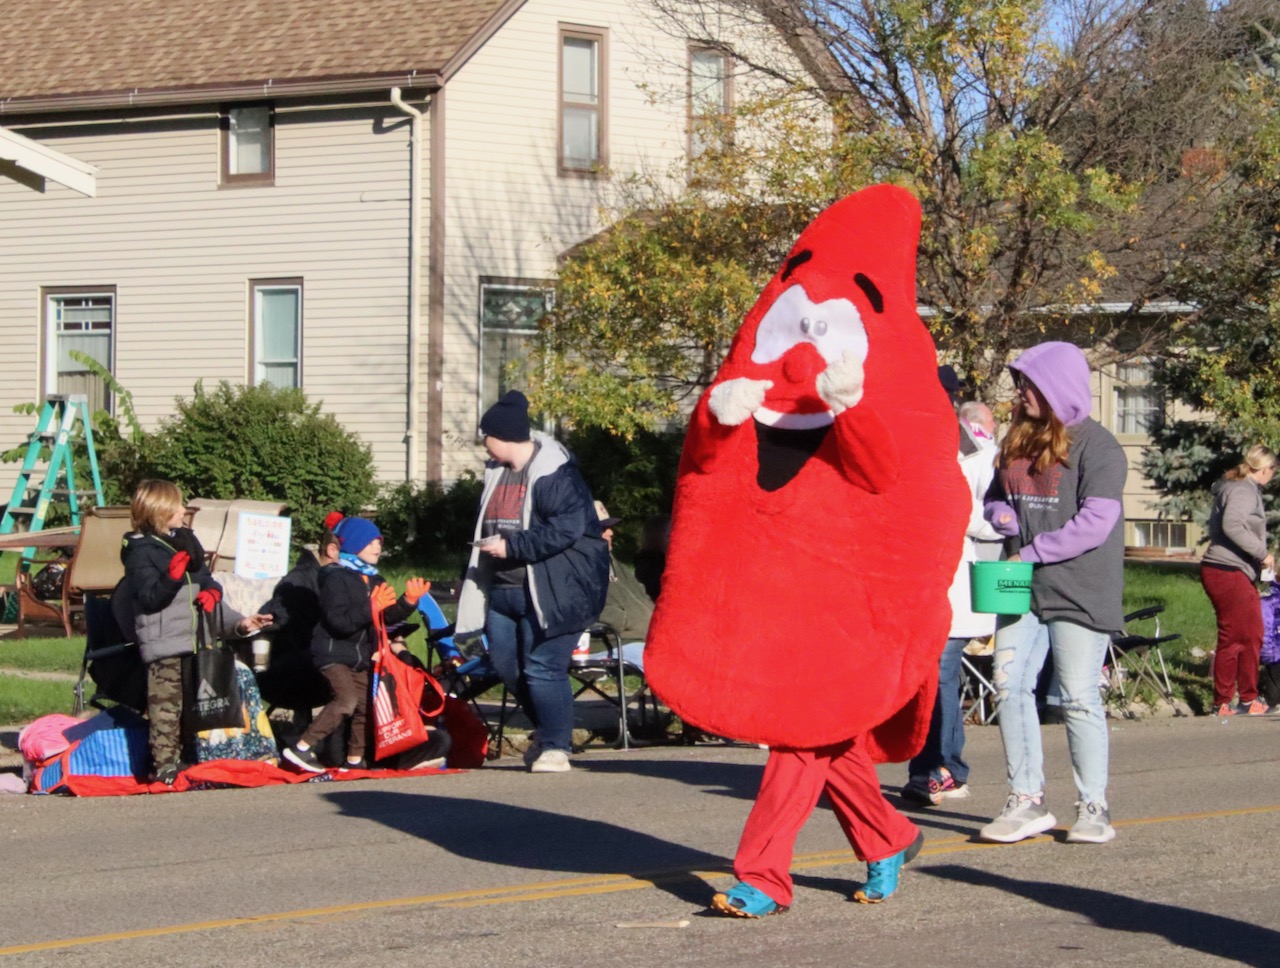 A variety of characters, including the LifeServe blood drop, were in the Northern State homecoming parade on Saturday, Oct 7. Aberdeen Insider photo by Elisa Sand